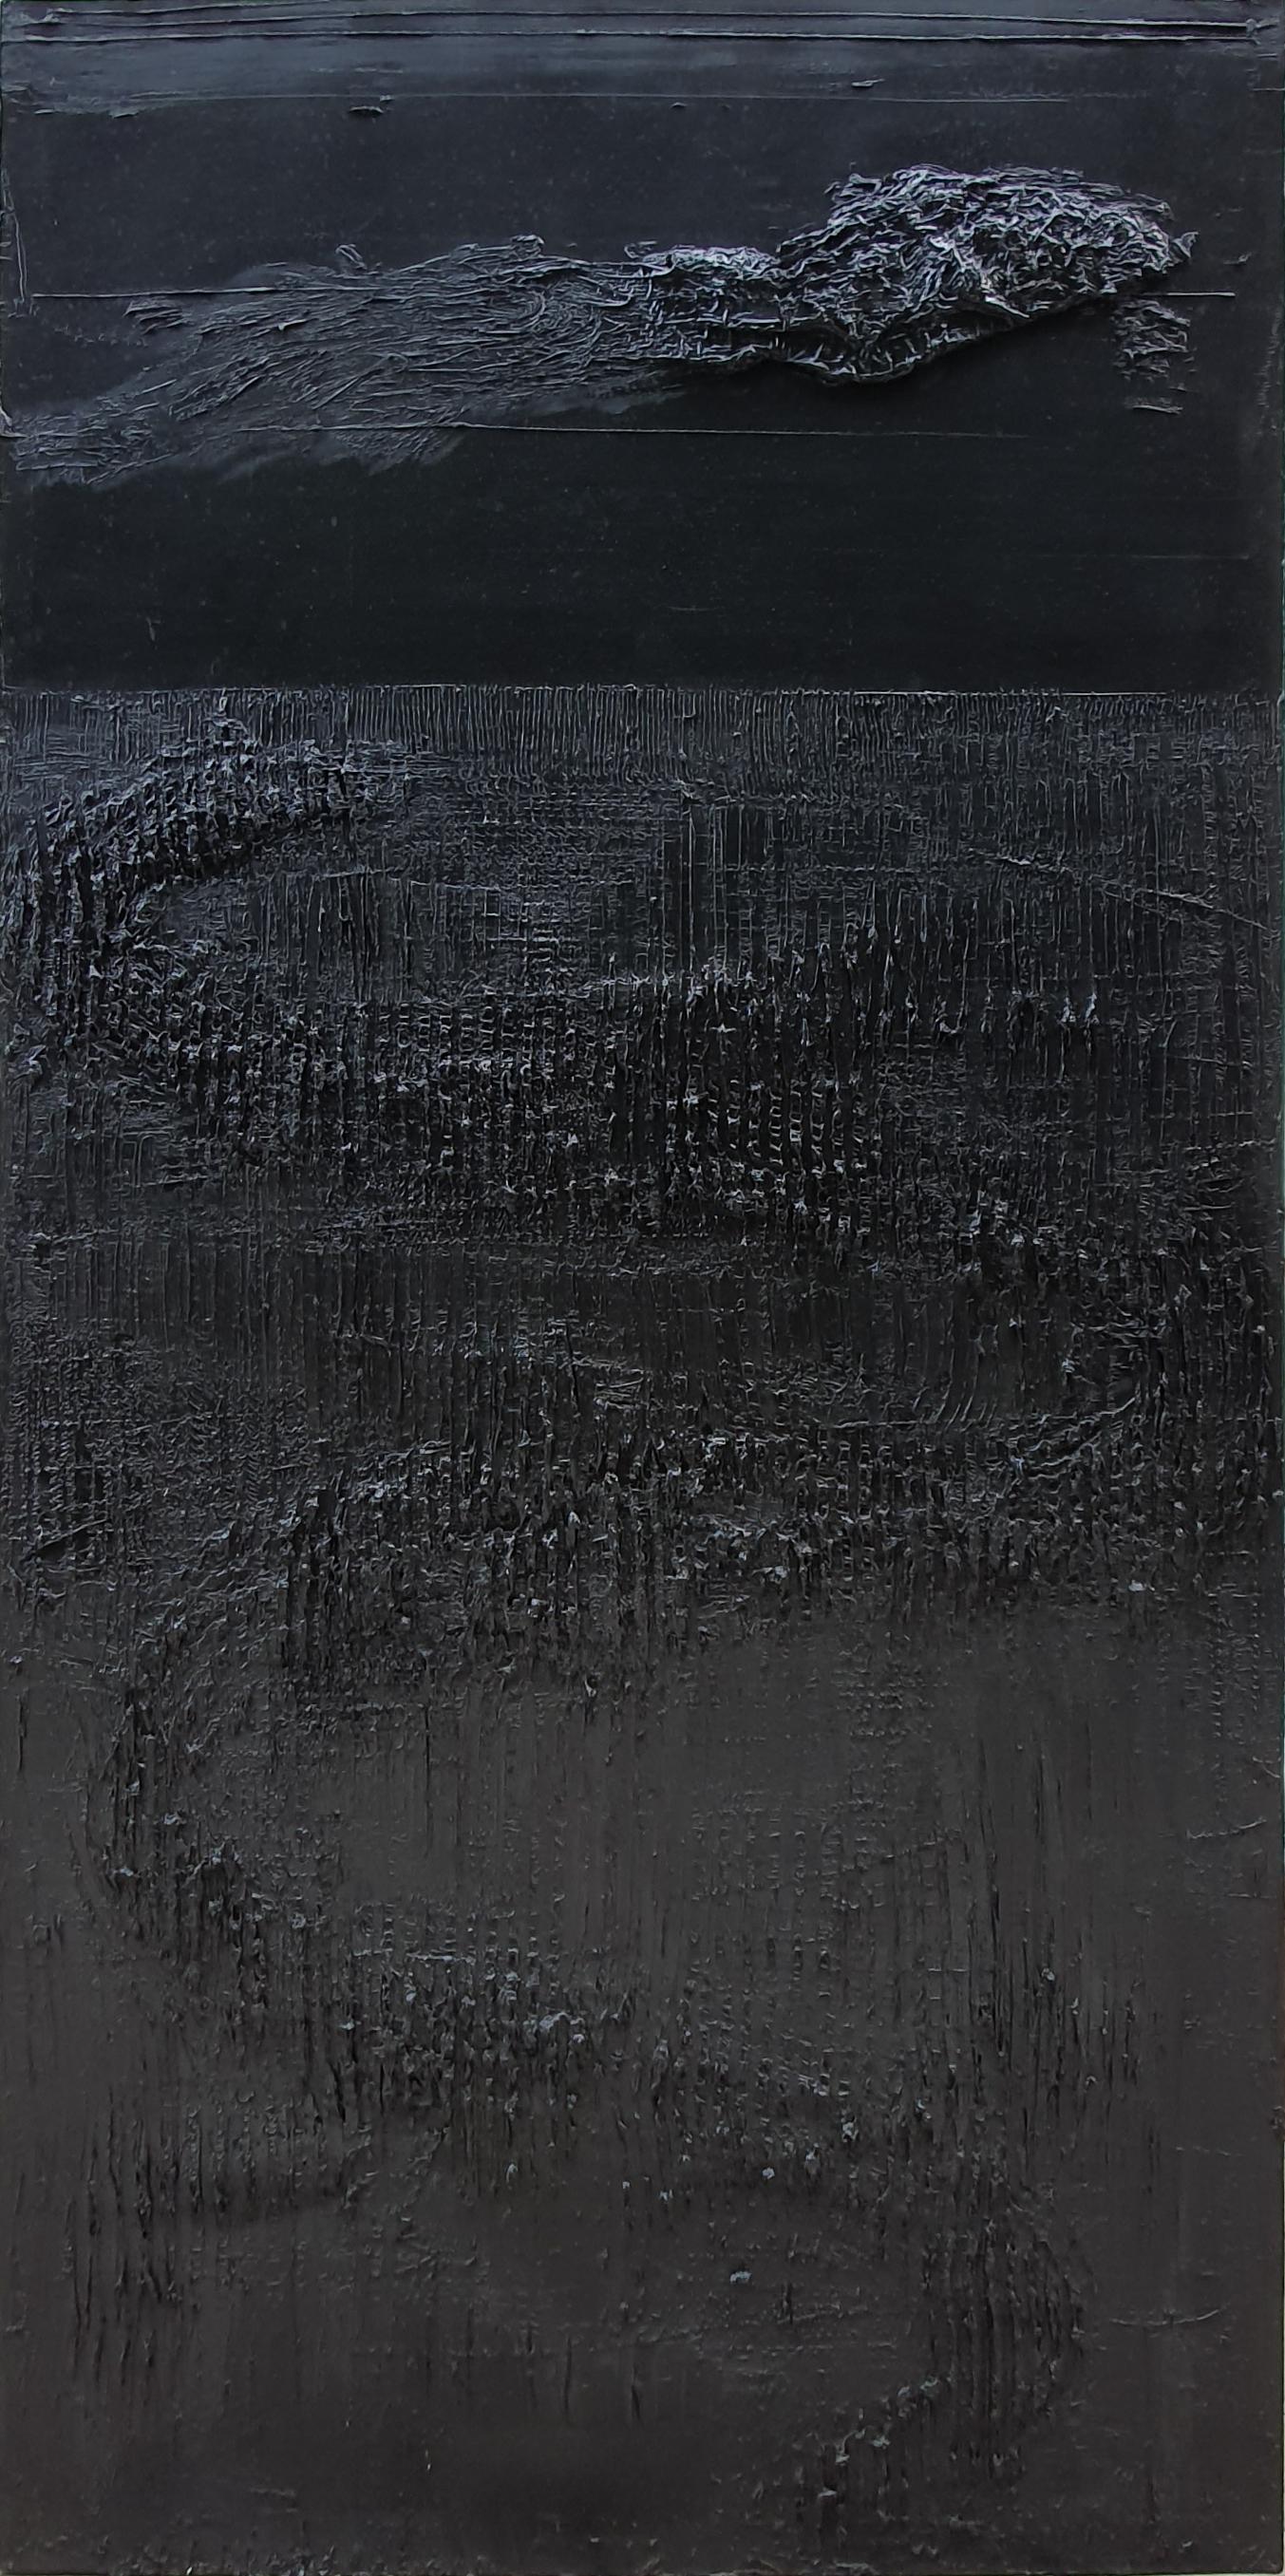 Untitled 5 (ABlackJECTION 5), 2012
Oil on canvas
78.74 H x 39.37  W in.
200 H x 100 W cm 

The notion of “abjection”, which at the beginnings referred to the idea of spirit degradation, it’s evilness and indignity would be exploited in the